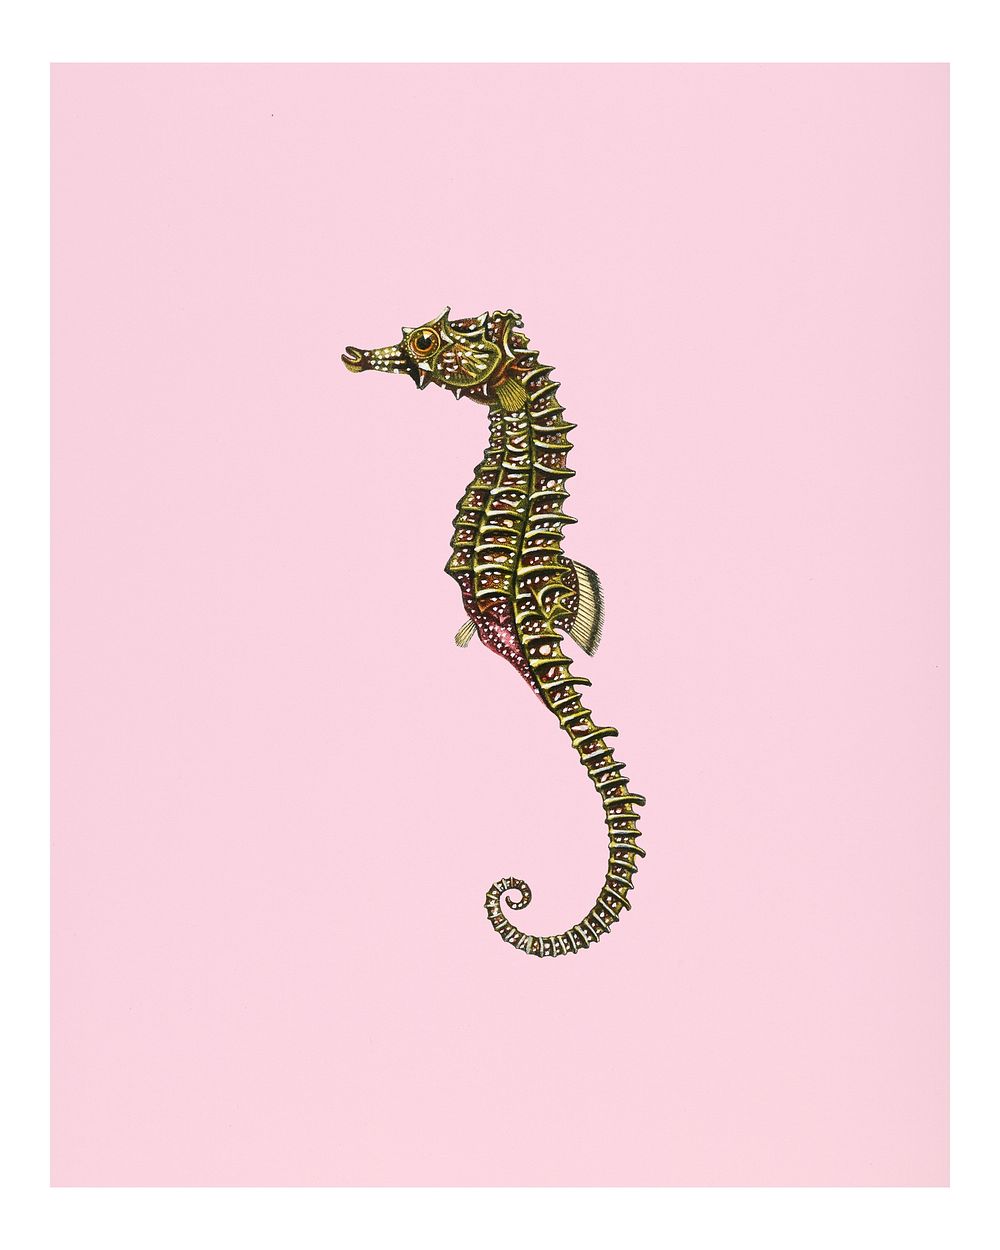 Vintage lined seahorse (Hippocampus Erectus) illustration wall art print and poster.